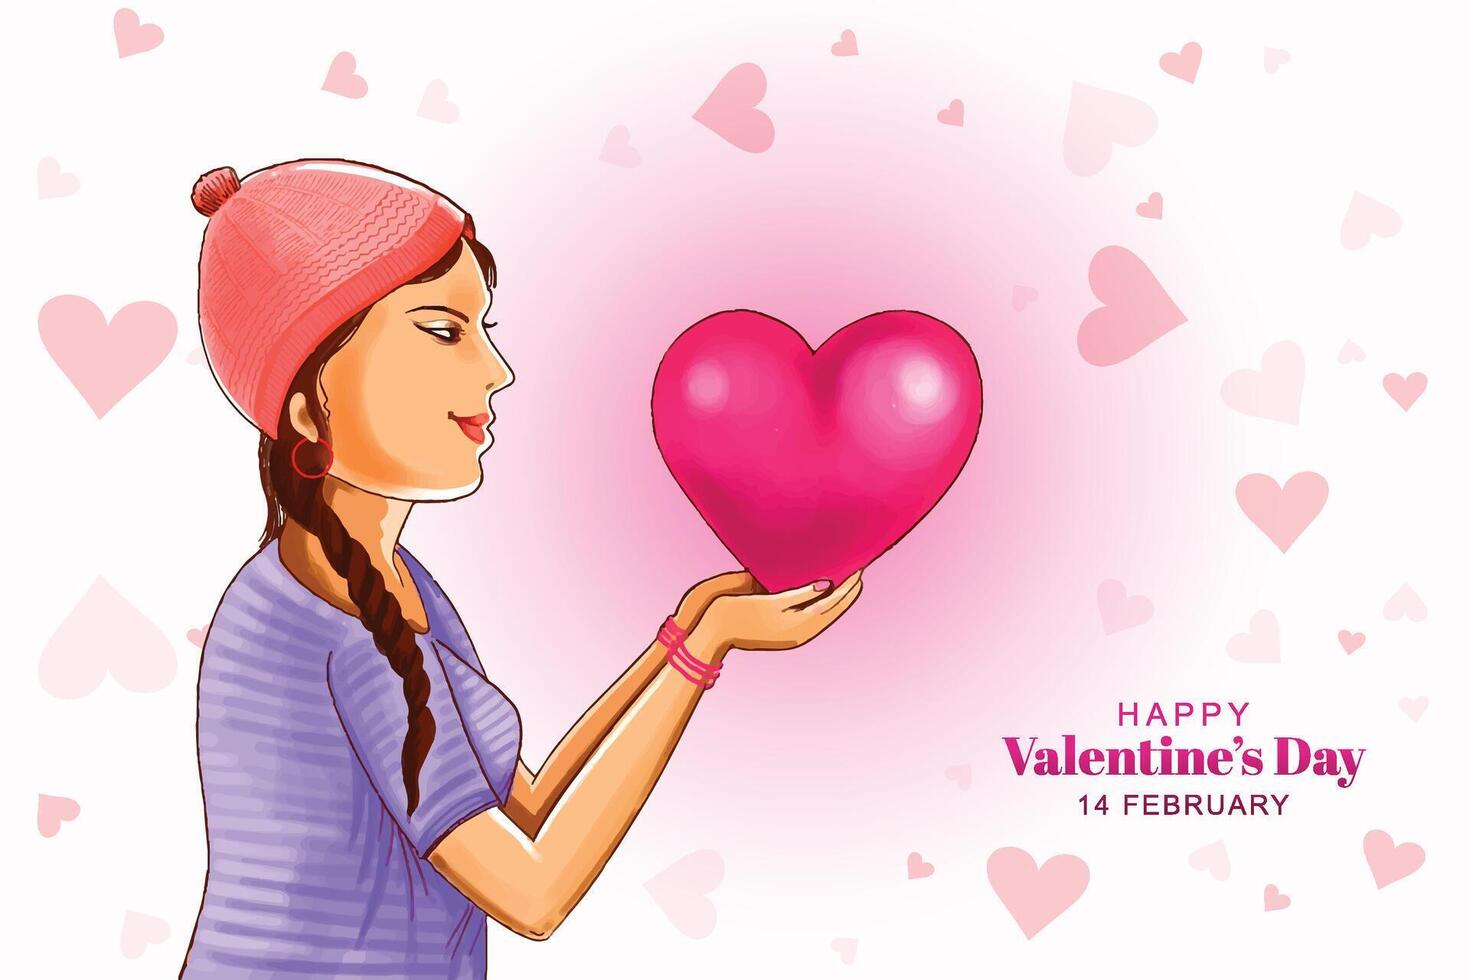 Beautiful cute girl hand holding heart for valentines day celebration card background vector